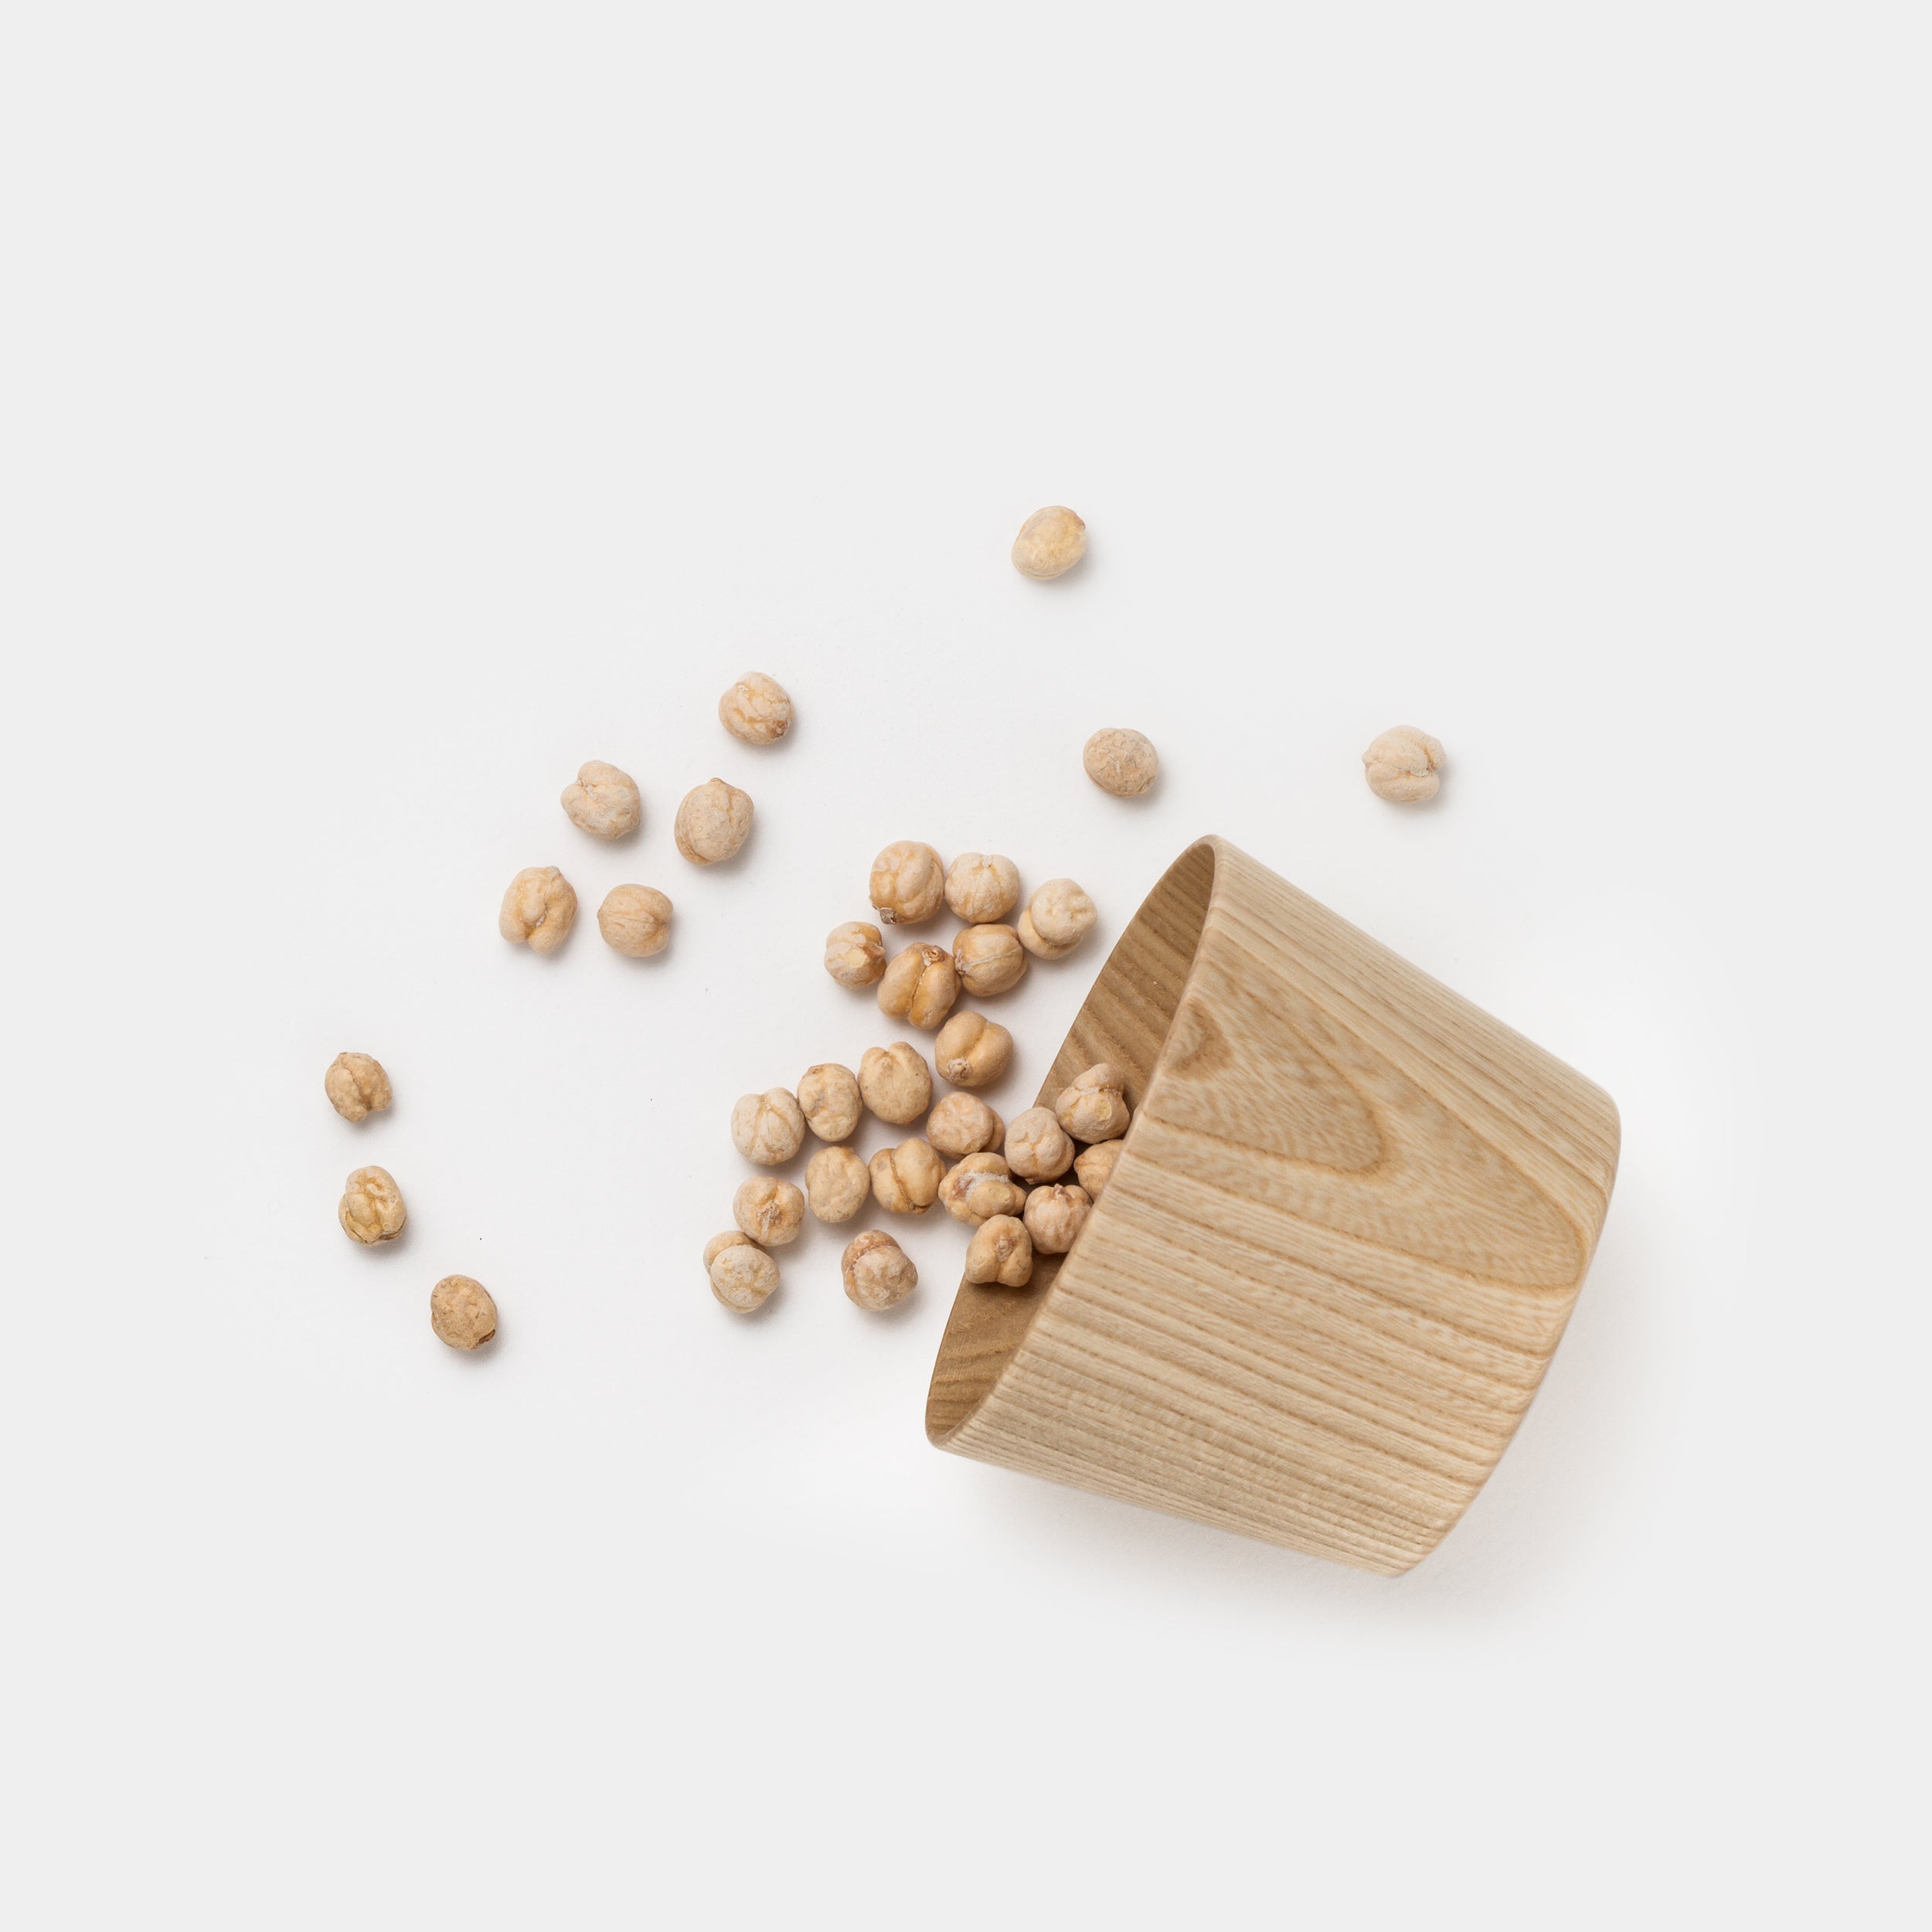 Kami Wood Cup Bowl with chickpeas